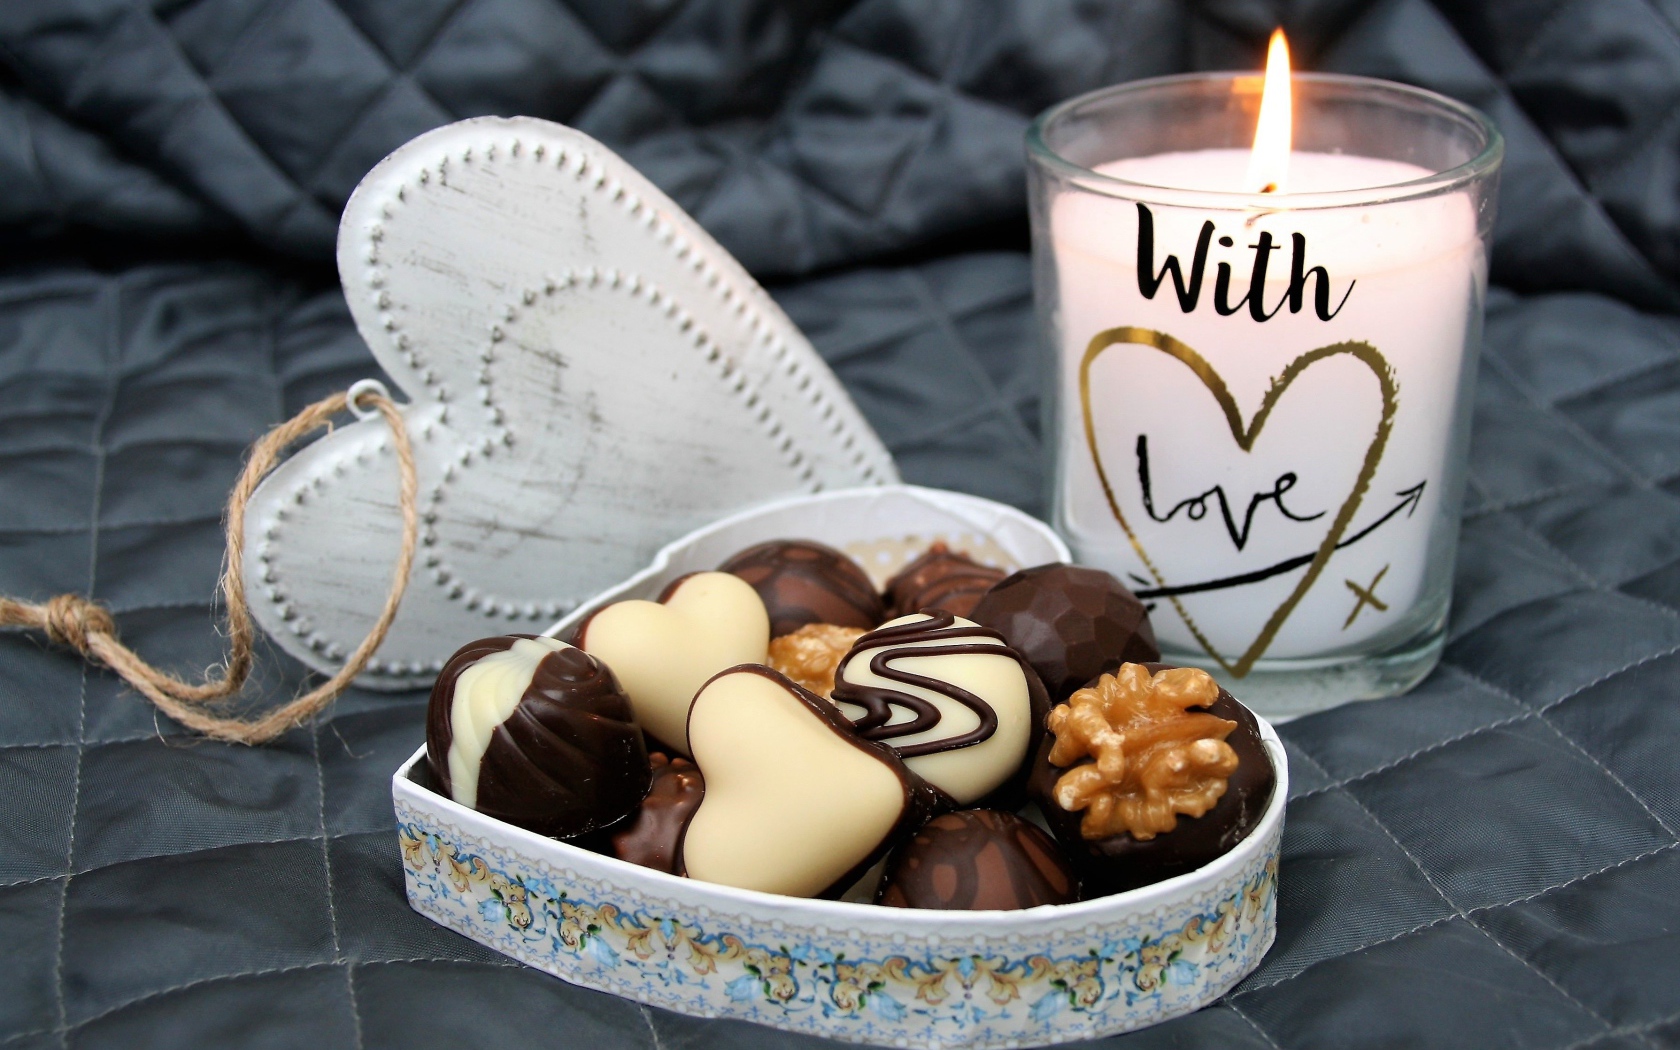 Chocolates in a heart shaped box on a bed with a lit candle